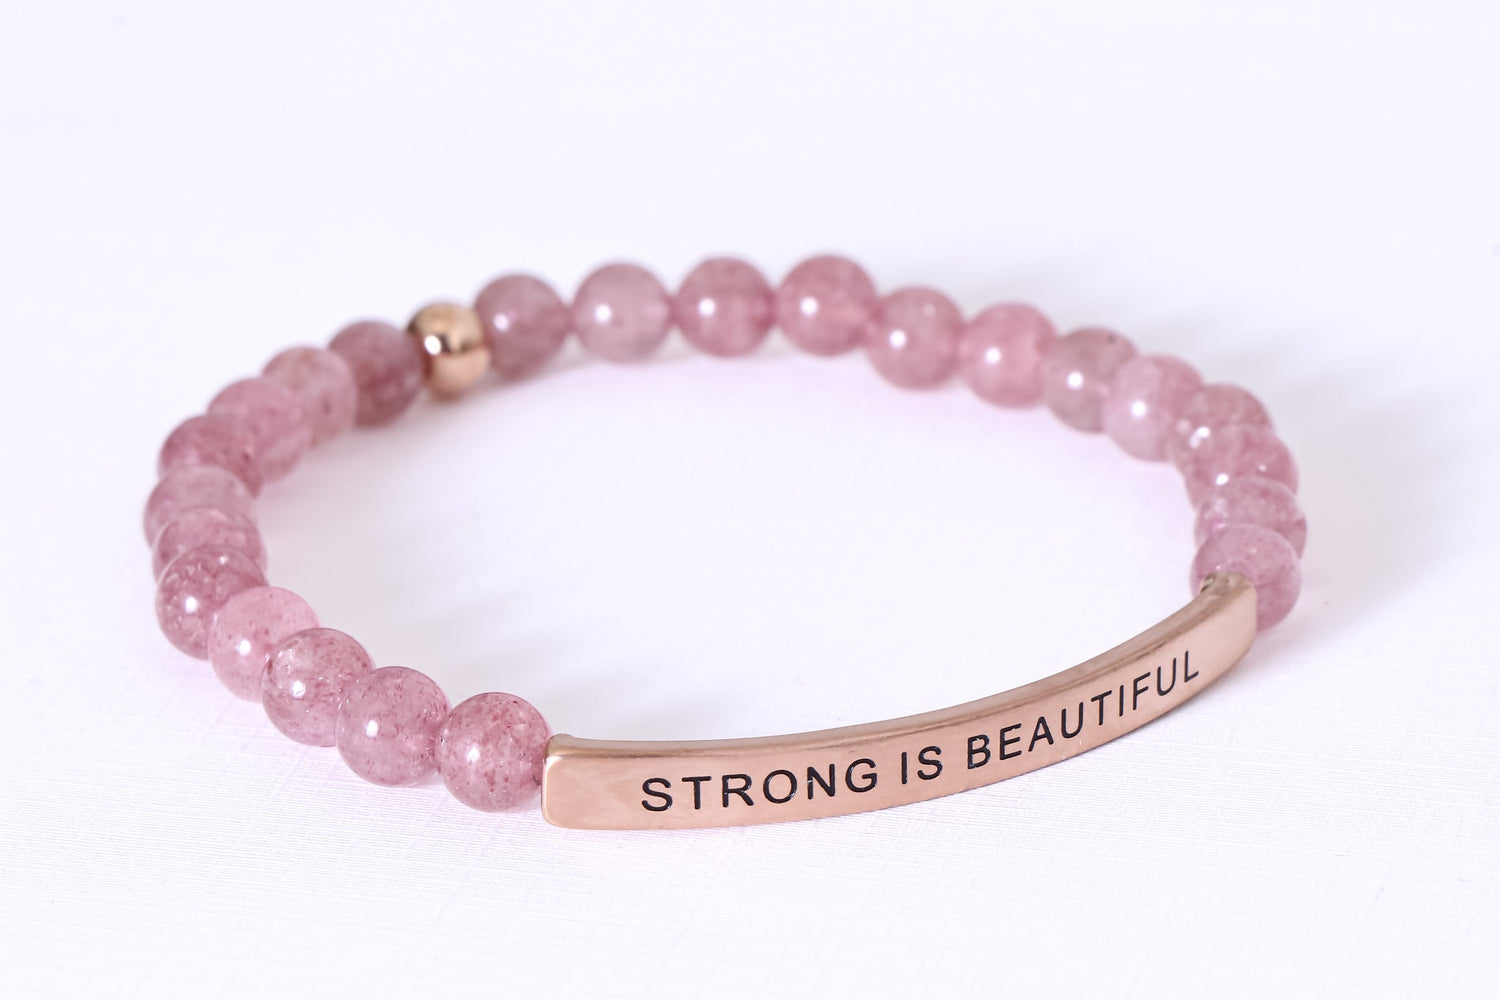 STRONG IS BEAUTIFUL - Inspiration Co.